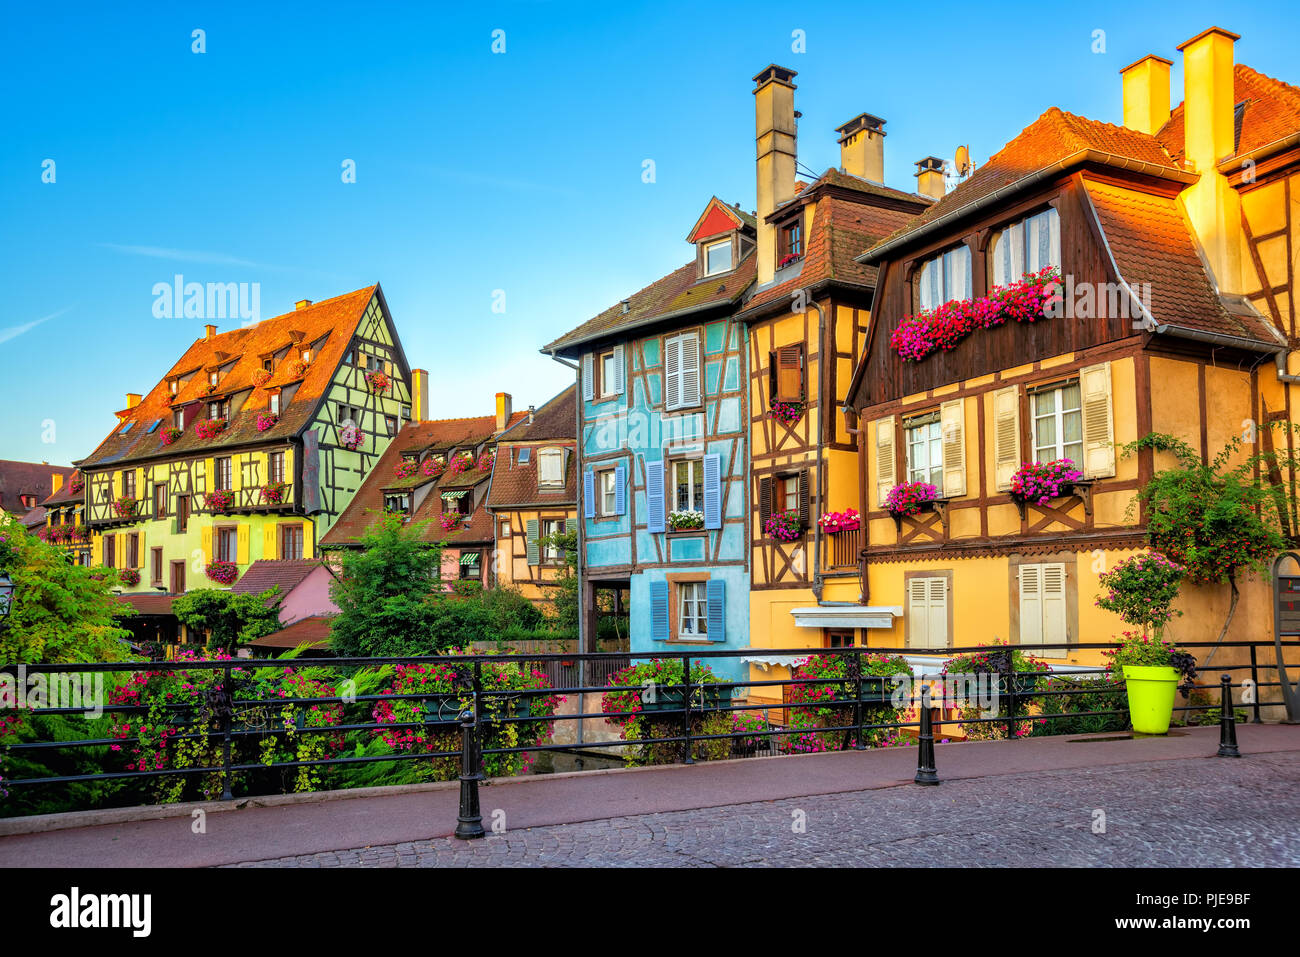 Traditional colorful timber houses in Colmar Old Town, a popular tourist destination in Alsace, France Stock Photo